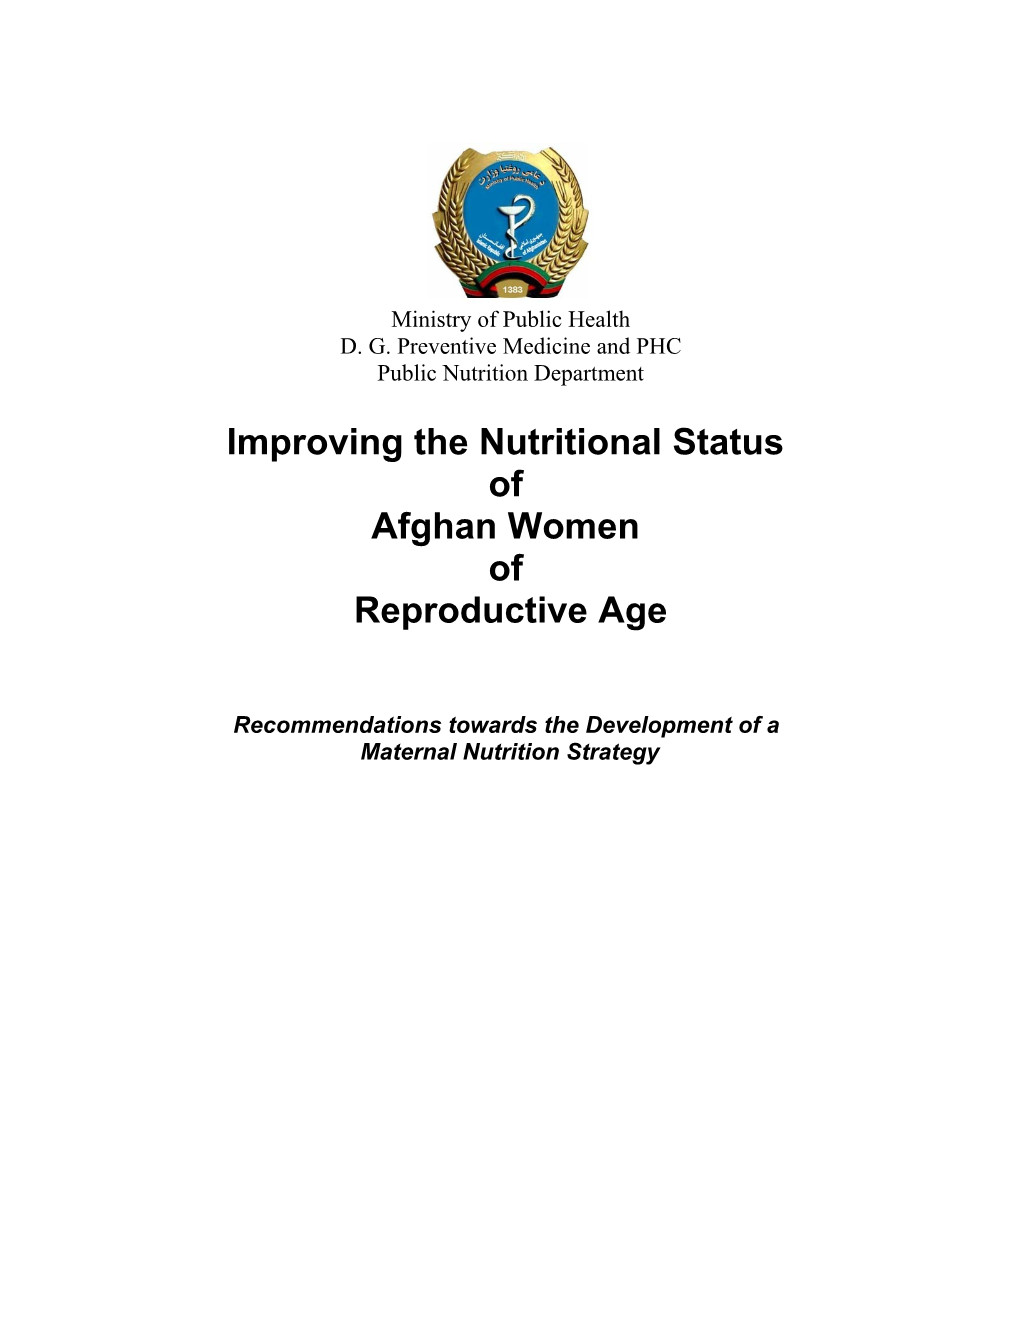 Strategy Improving the Nutritional Status of Afghan Women of Reproductive Age